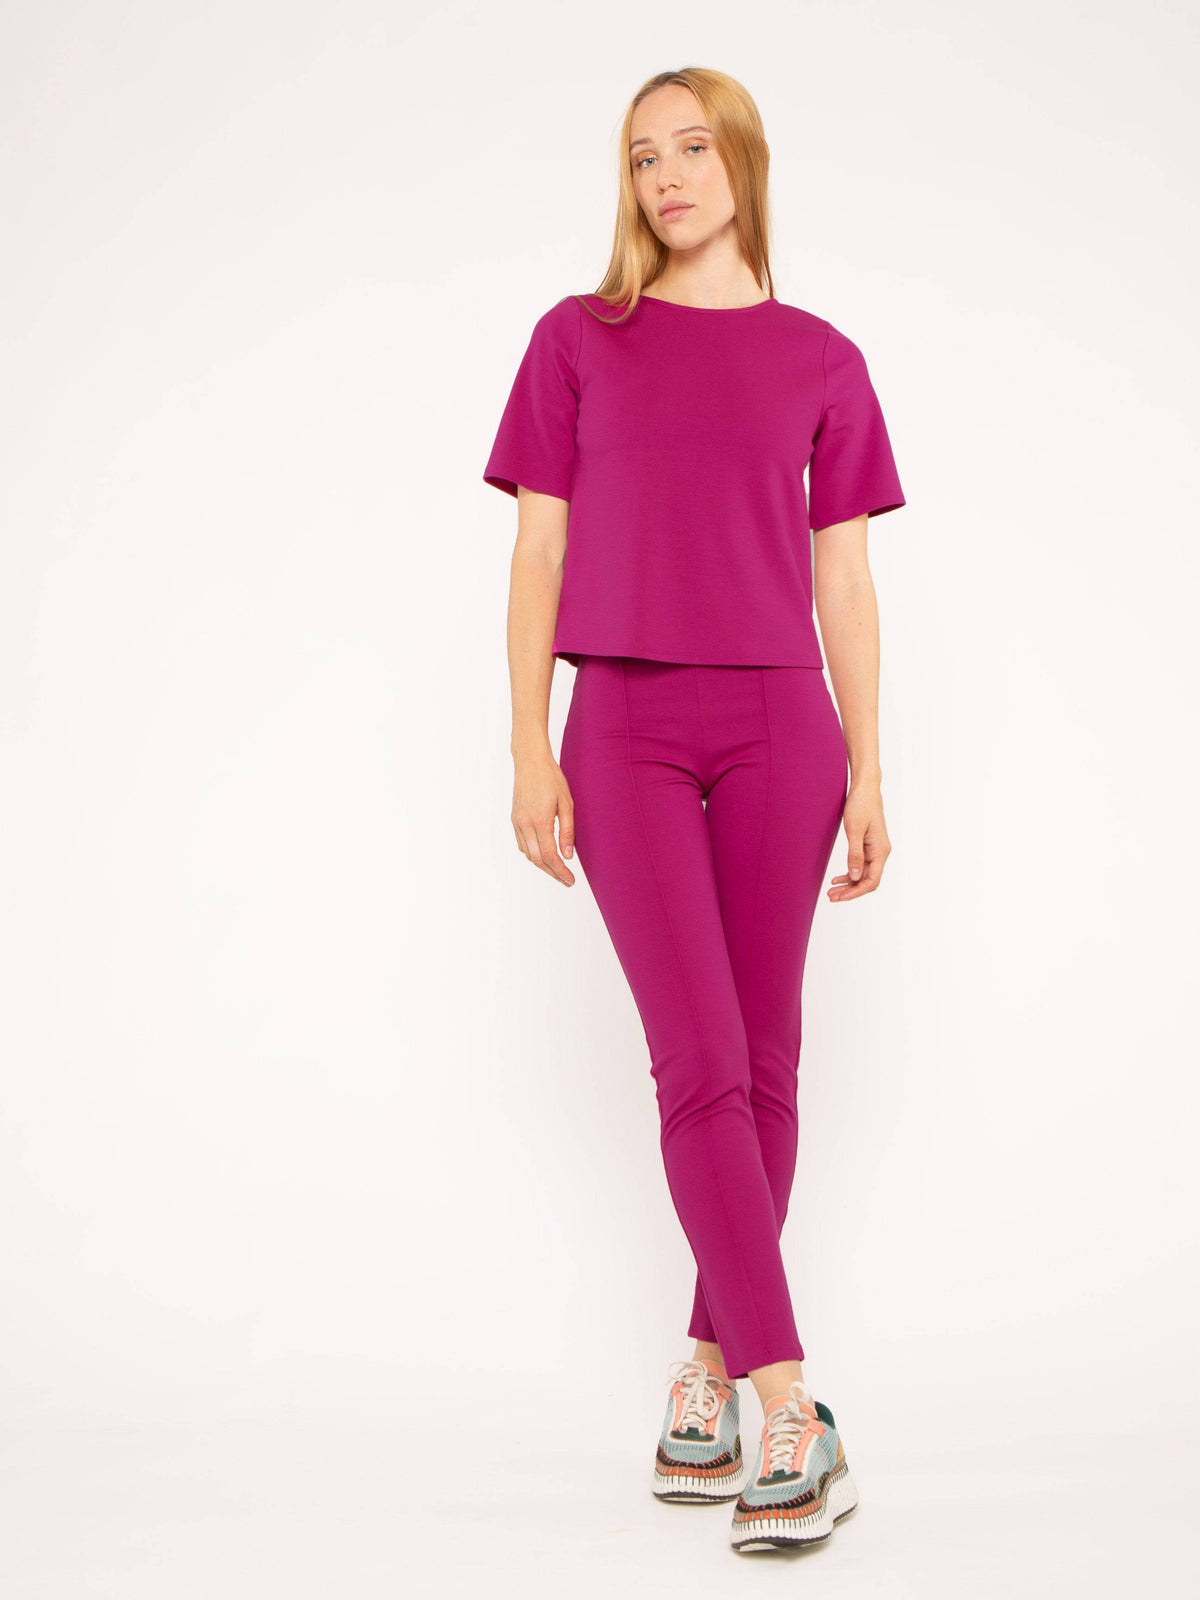 Fuchsia Ponte Knit Short Sleeve Top Extended